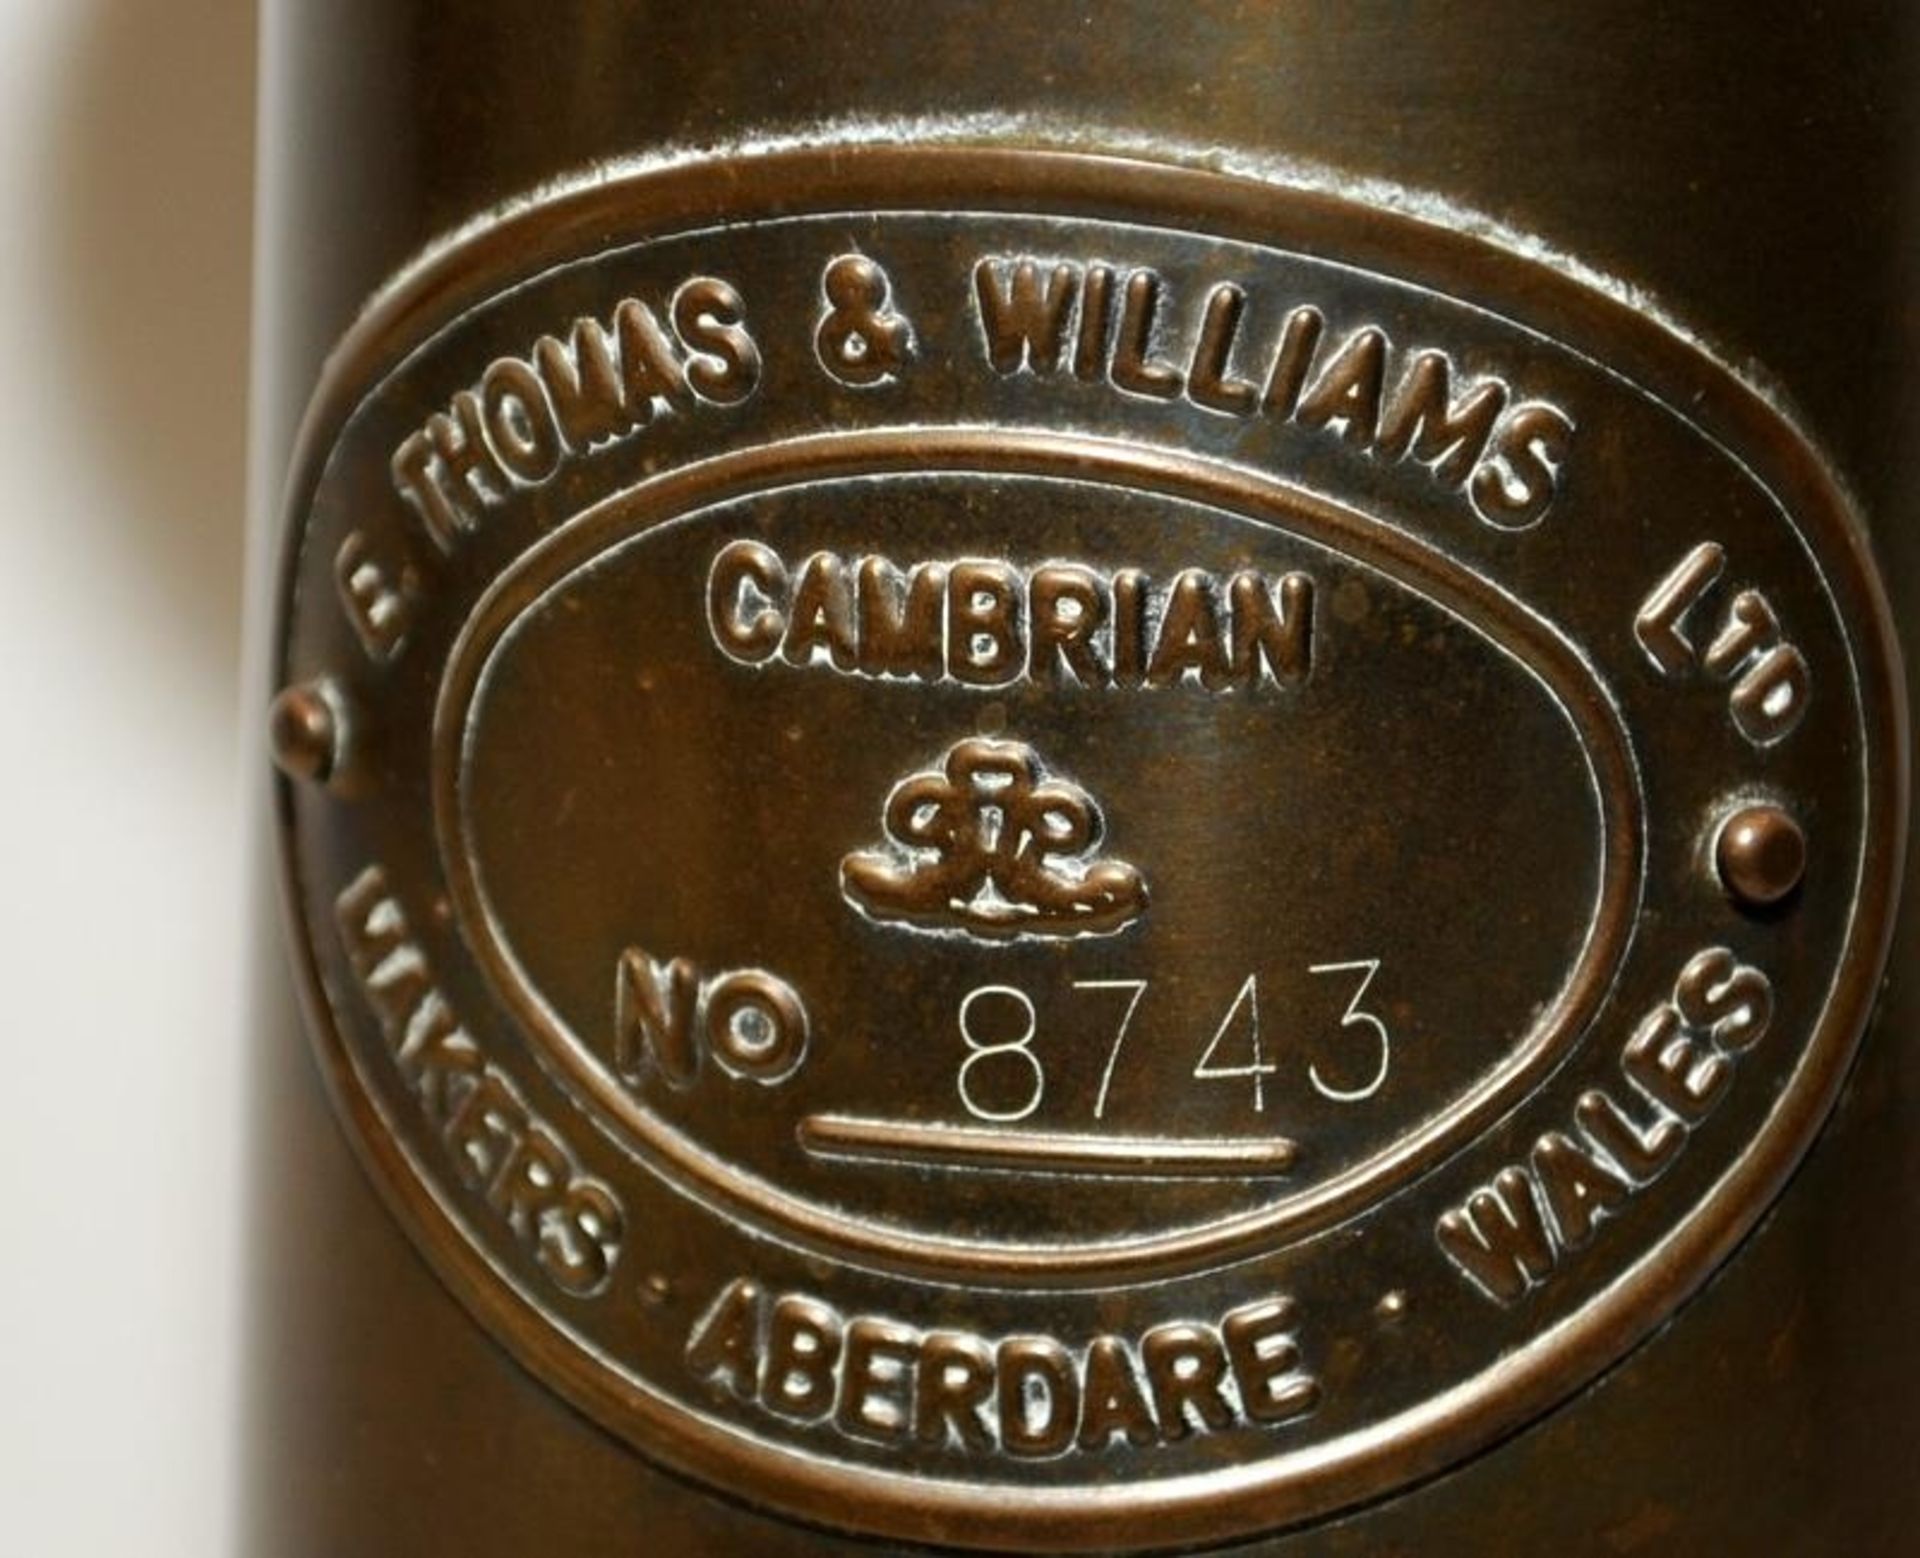 E Thomas & Williams Aberdare brass miners lamp c/w a vintage miniature example - Image 2 of 3